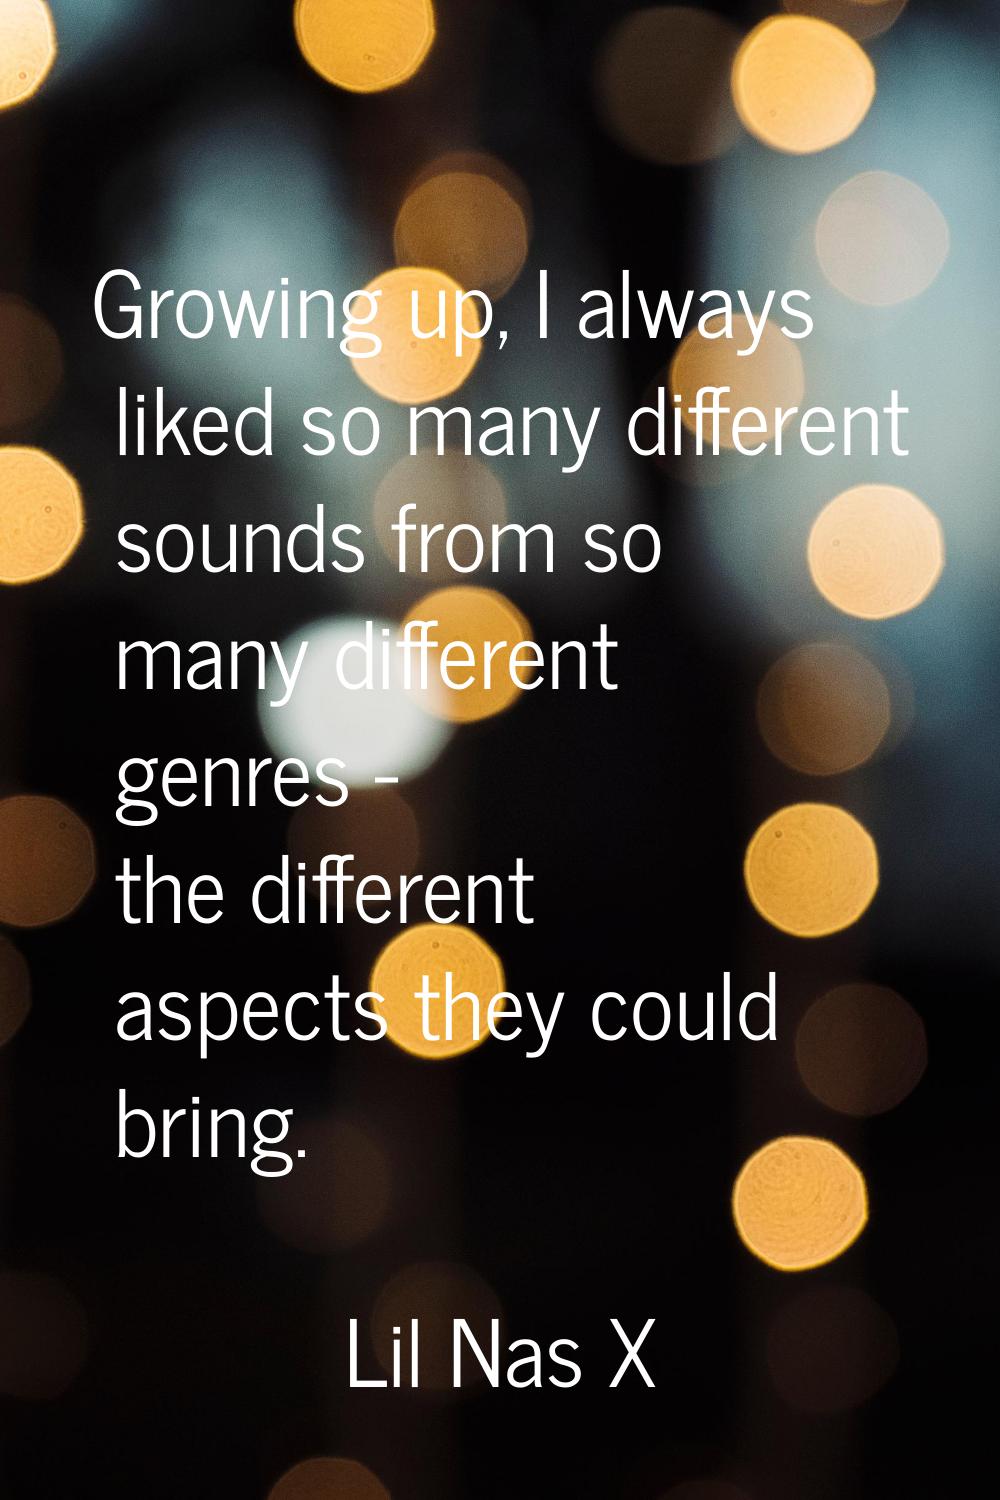 Growing up, I always liked so many different sounds from so many different genres - the different a